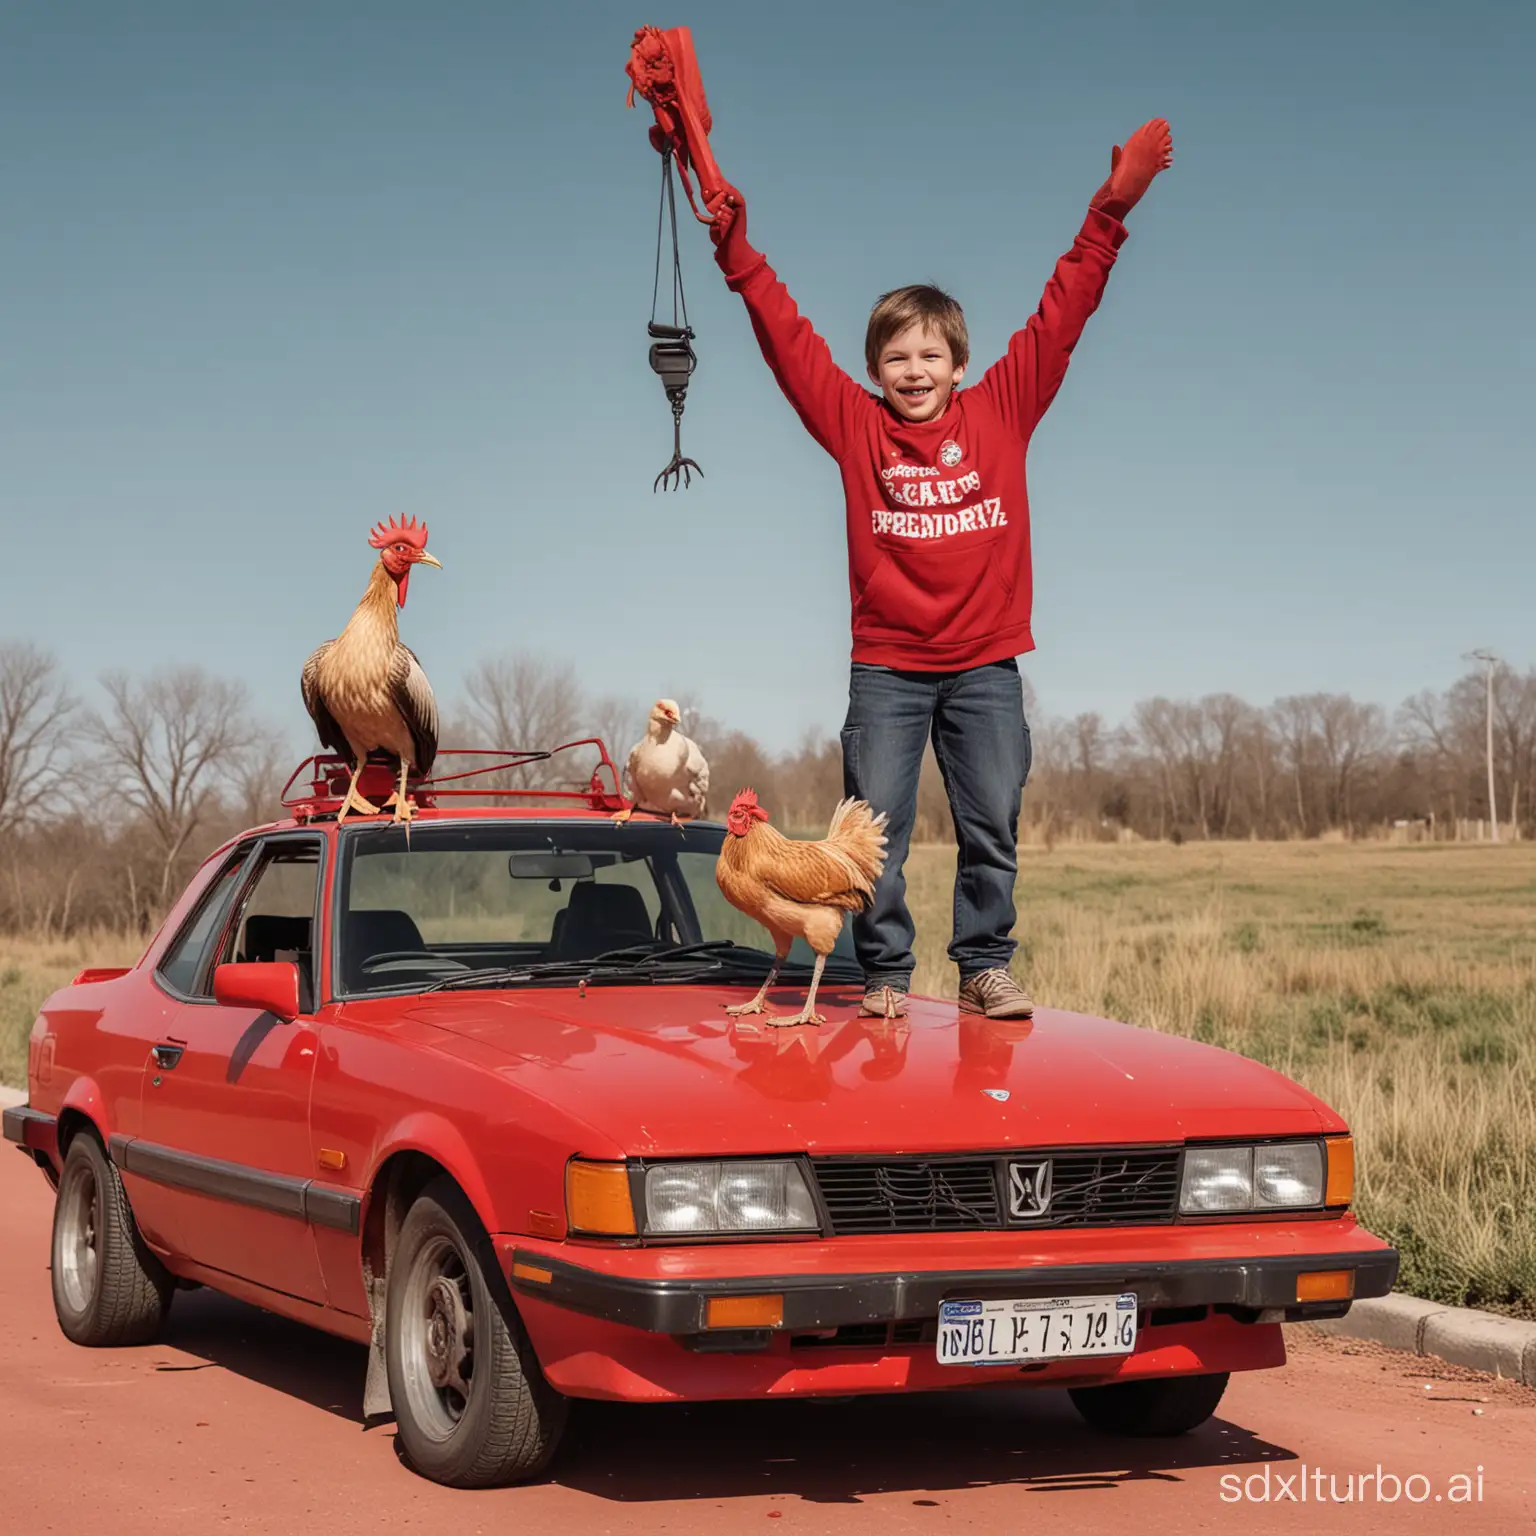 Empowering-Disabled-Child-Stands-on-Red-Car-Hood-with-Crane-and-Chicken